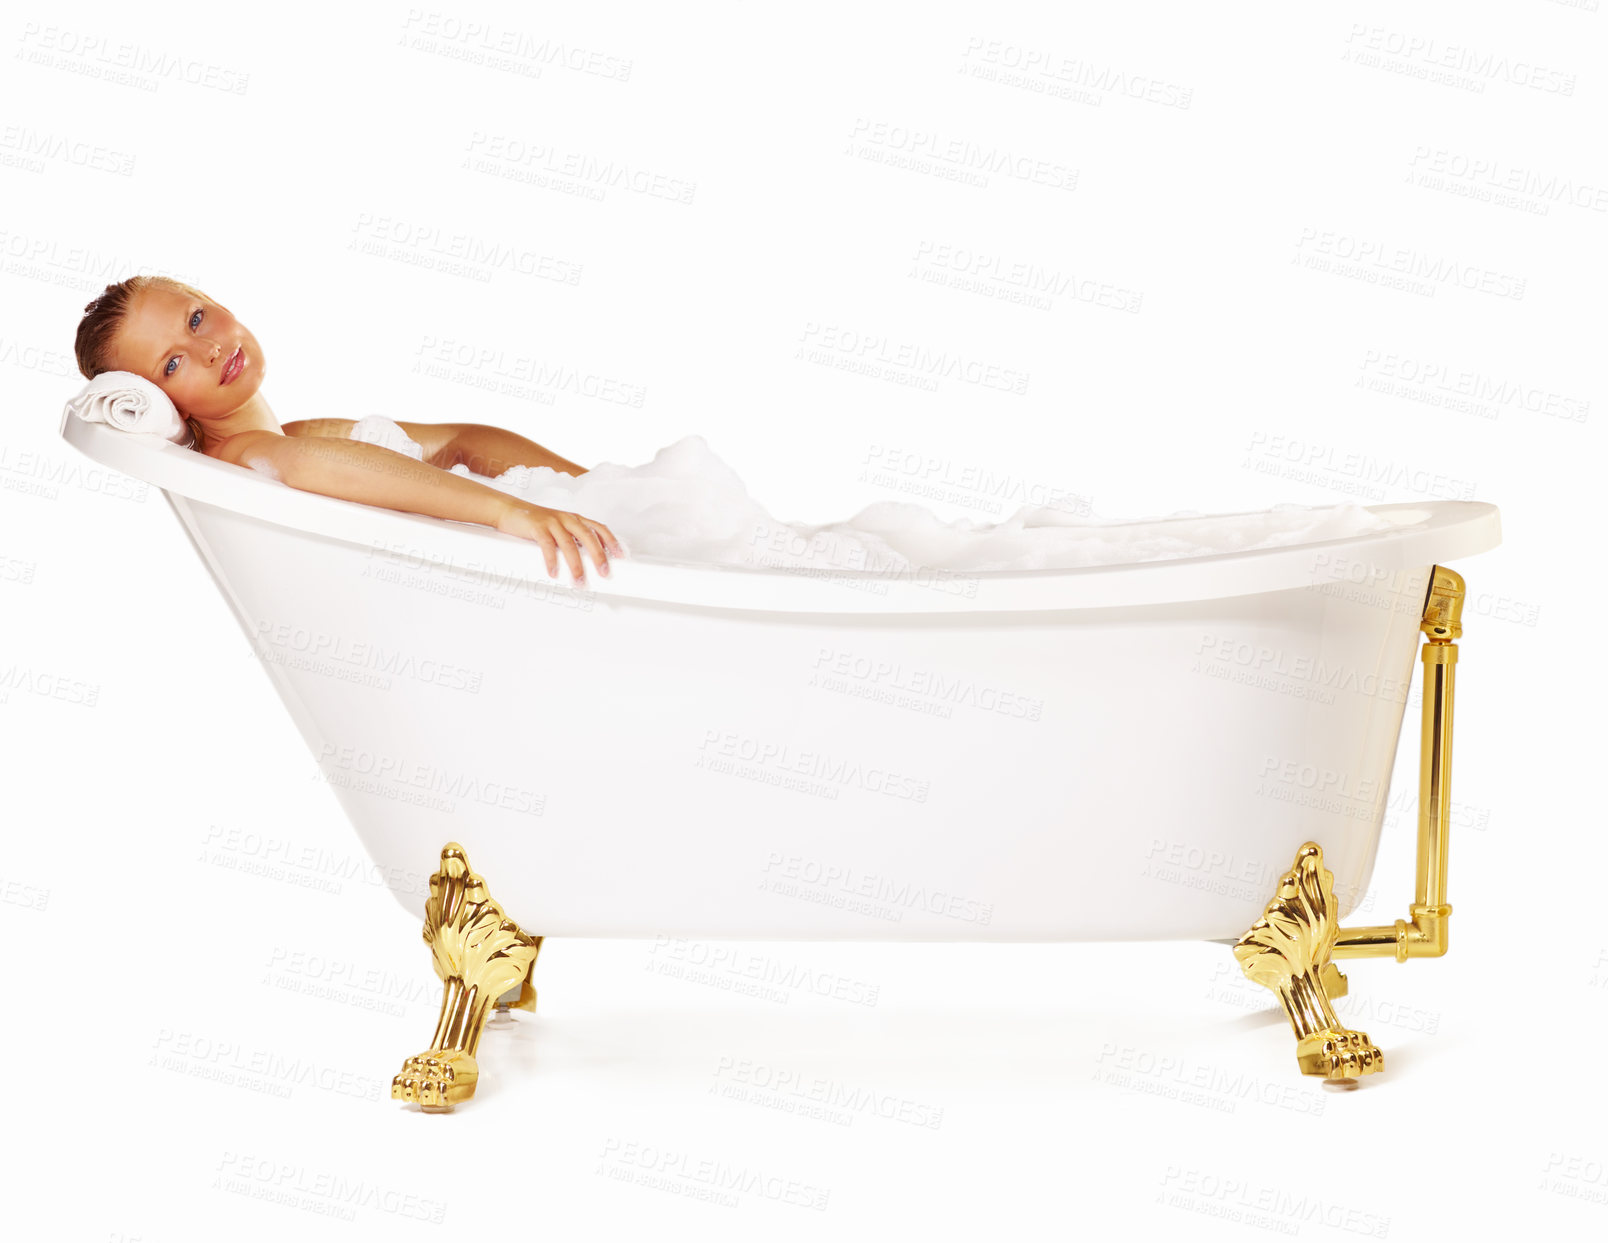 Buy stock photo Portrait, bath tub and studio woman cleaning, grooming or washing for relax body care, hygiene or spa skincare treatment. Bathroom bubbles, soap foam and salon person wellness on white background